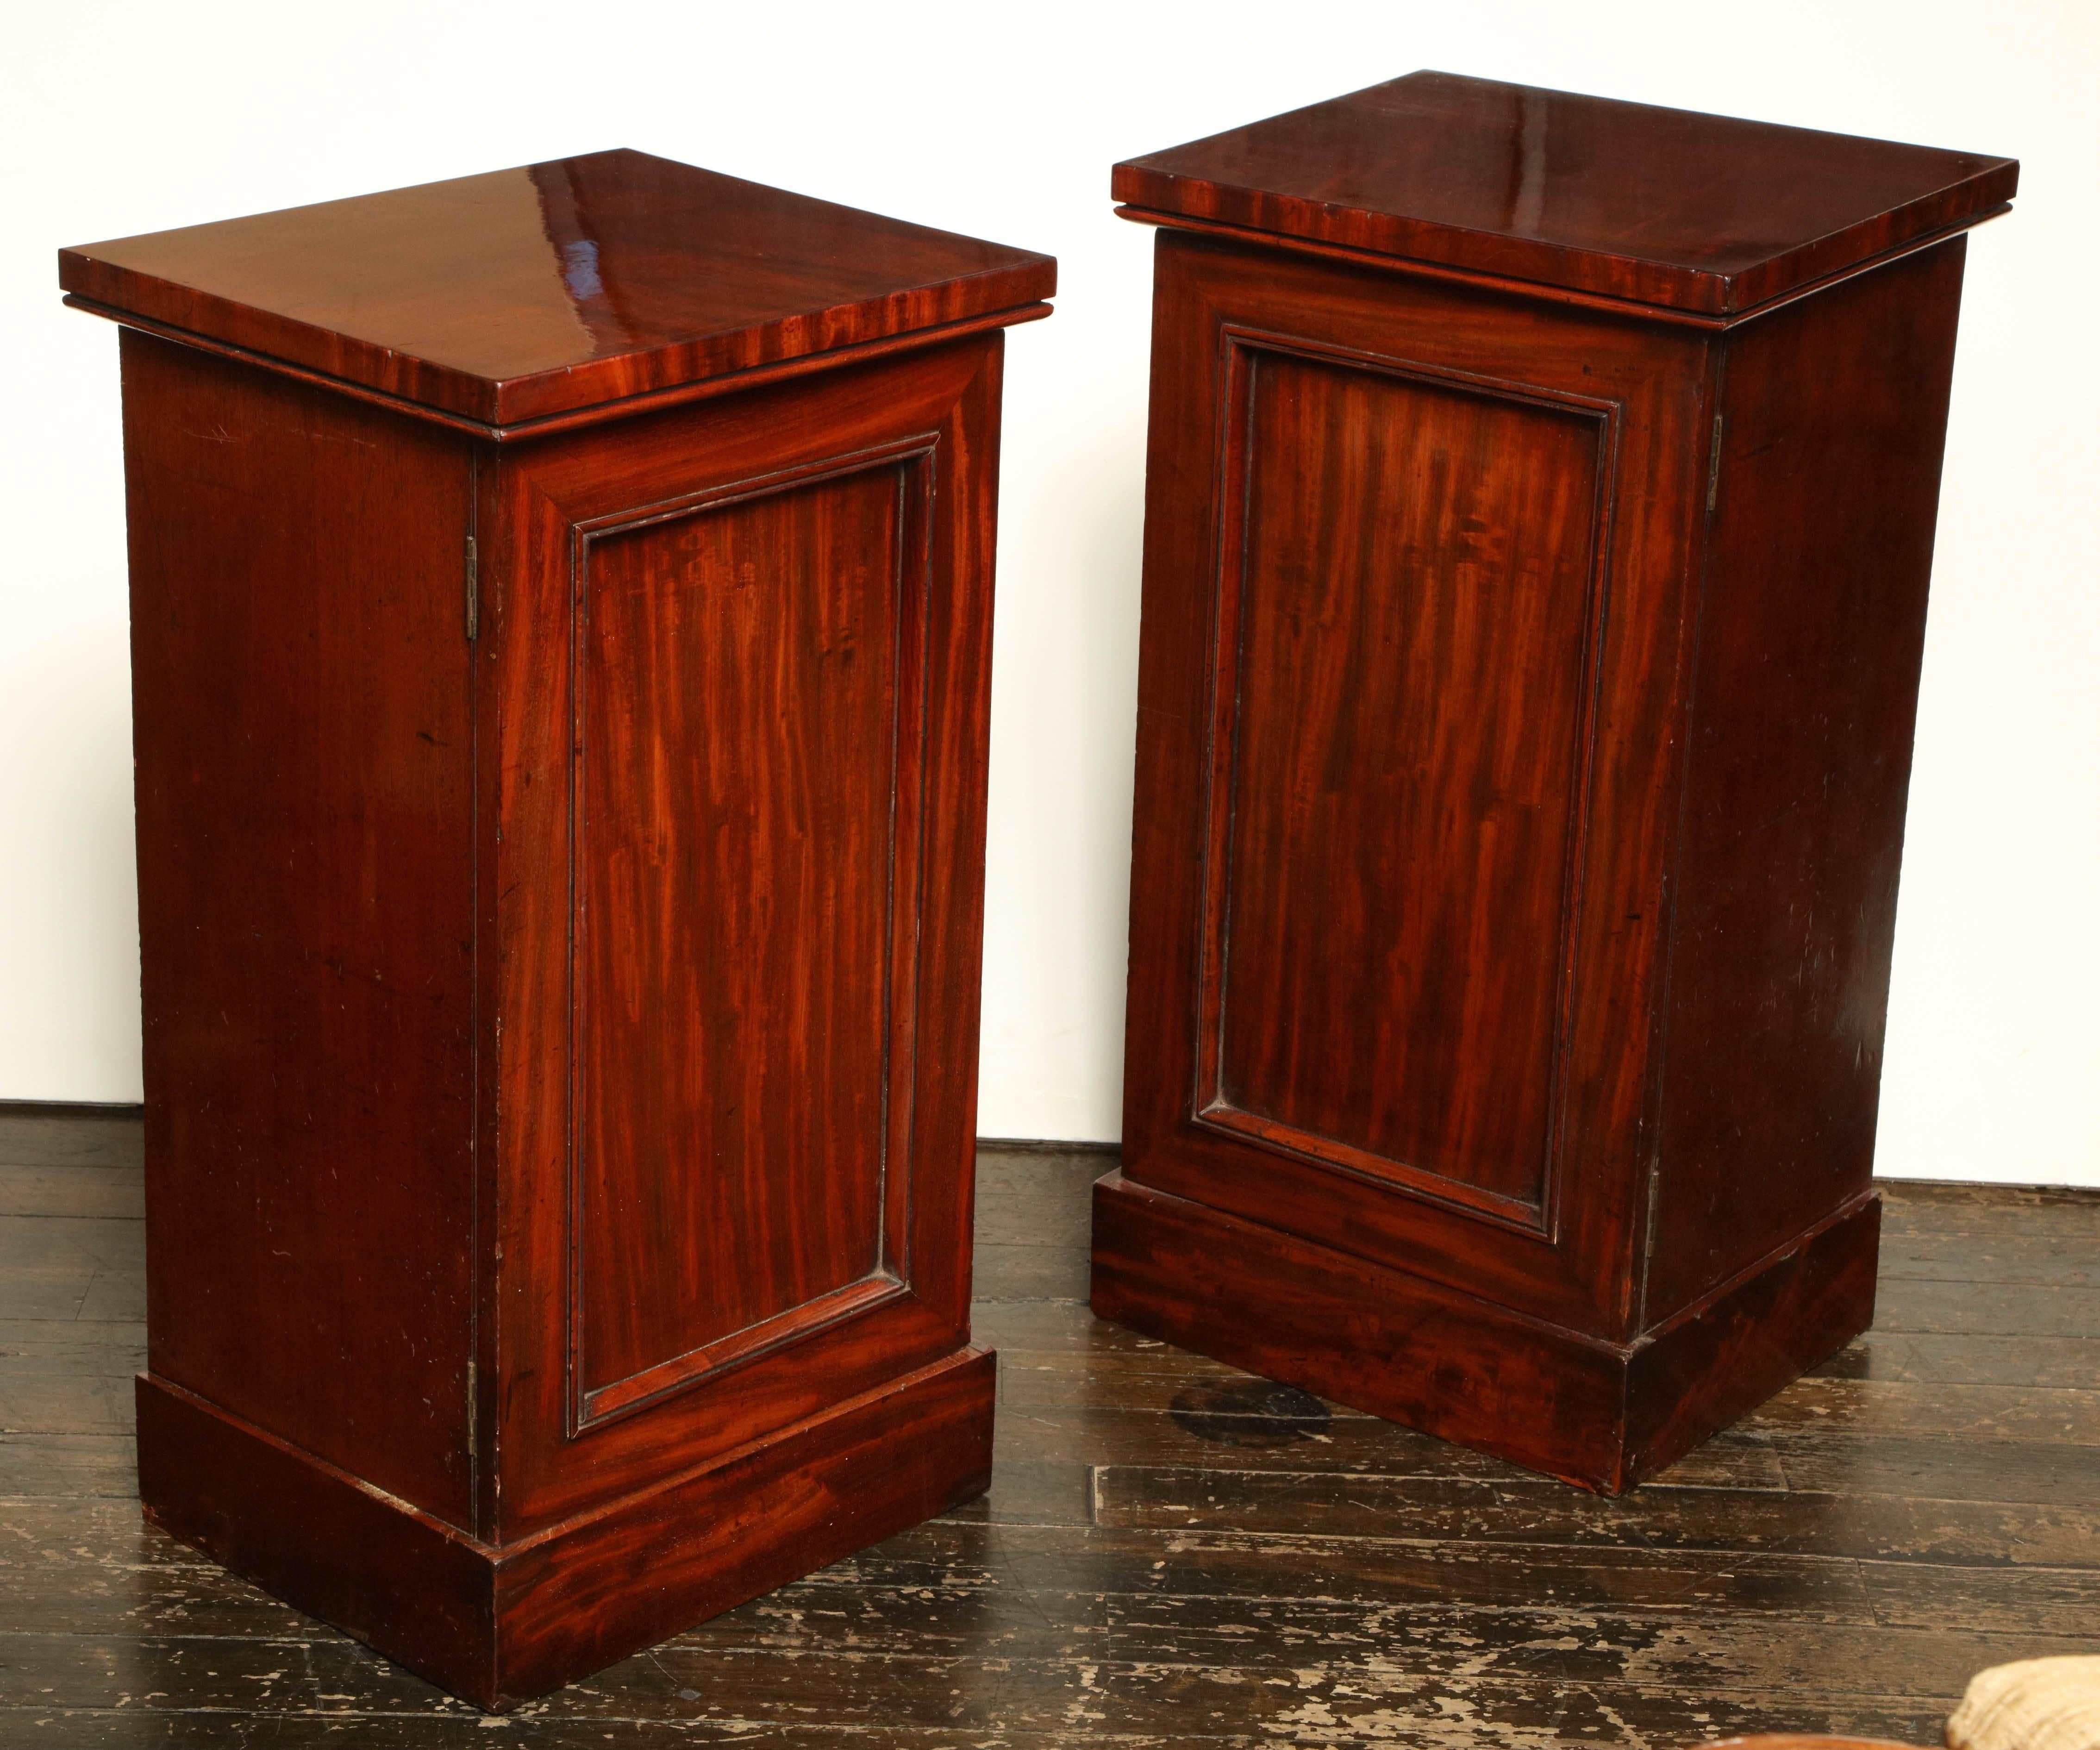 Pair of late 19th century English, mahogany bedside tables.